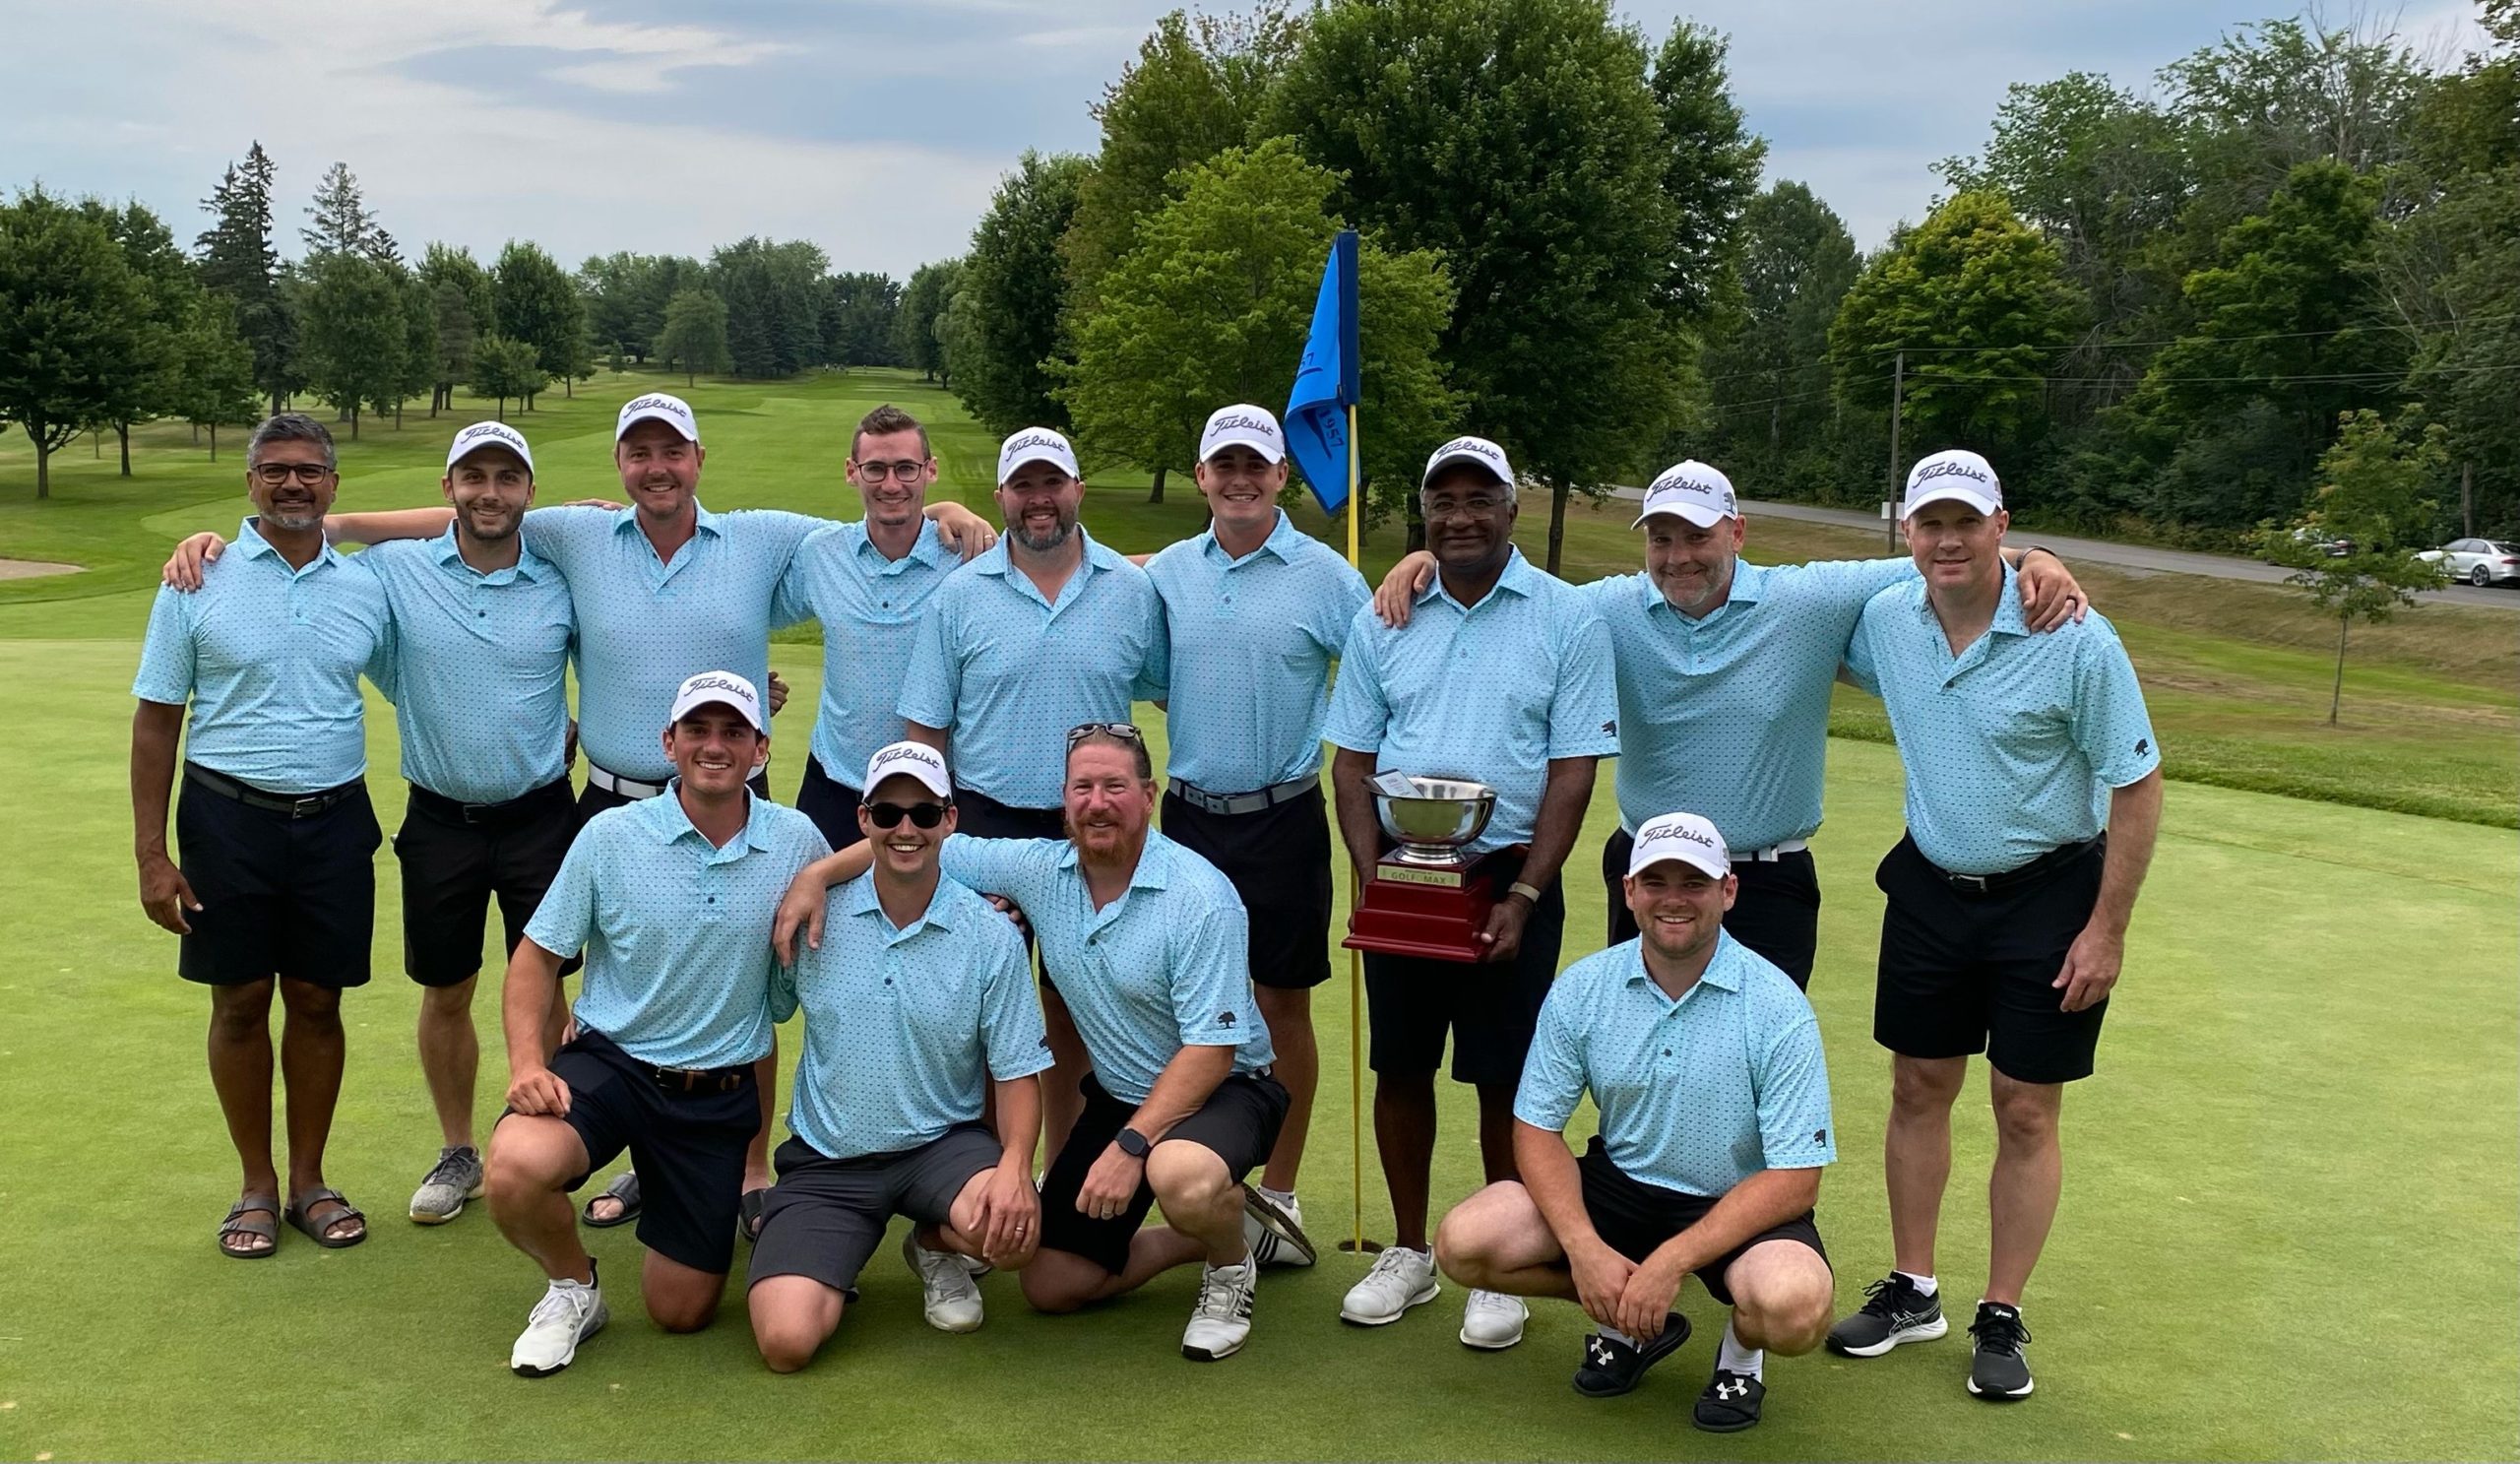 OVGA Men's Intersectionals: The Streak Continues at Rideau View